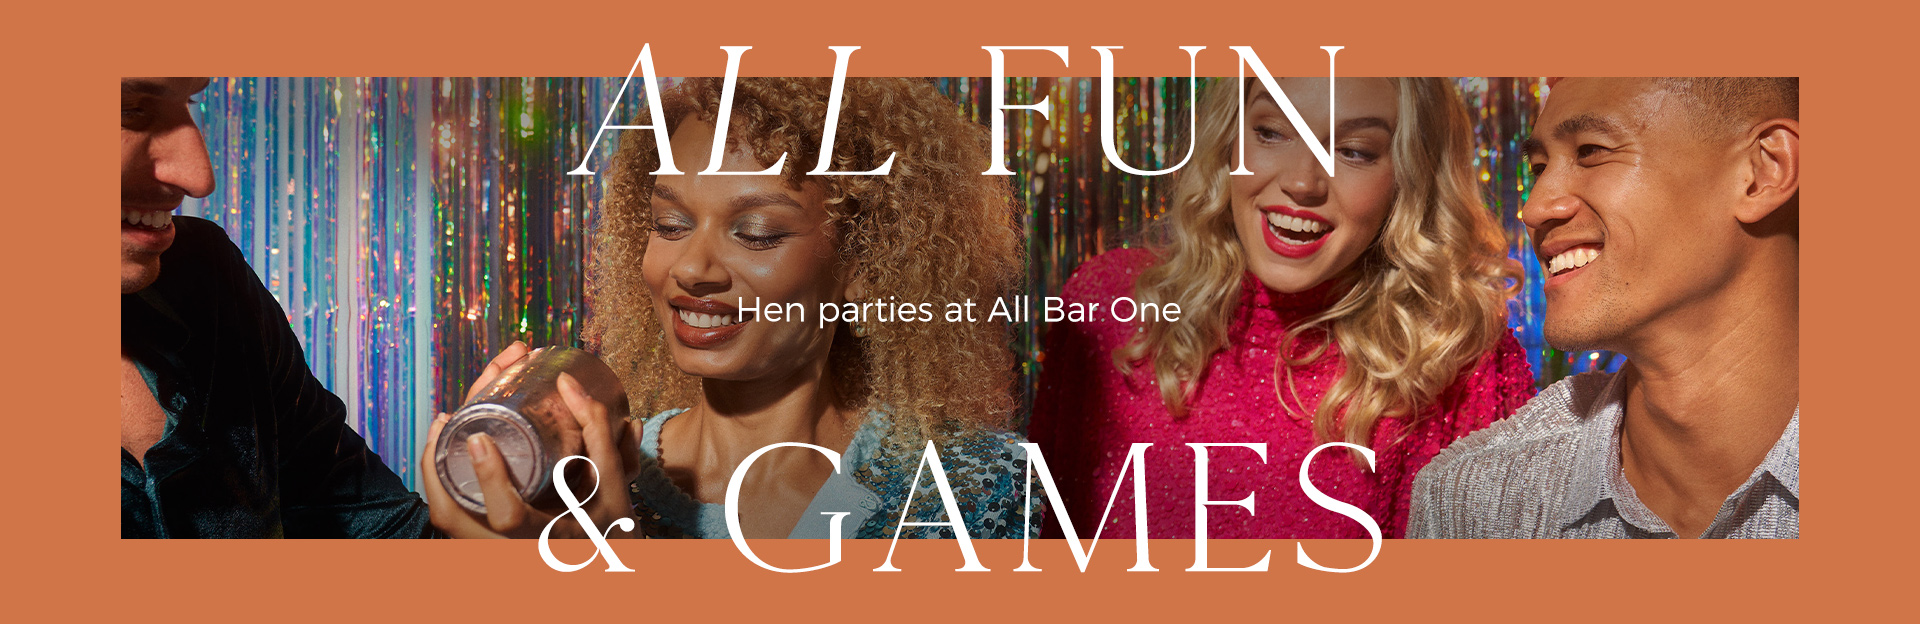 Hen parties at All Bar One Liverpool